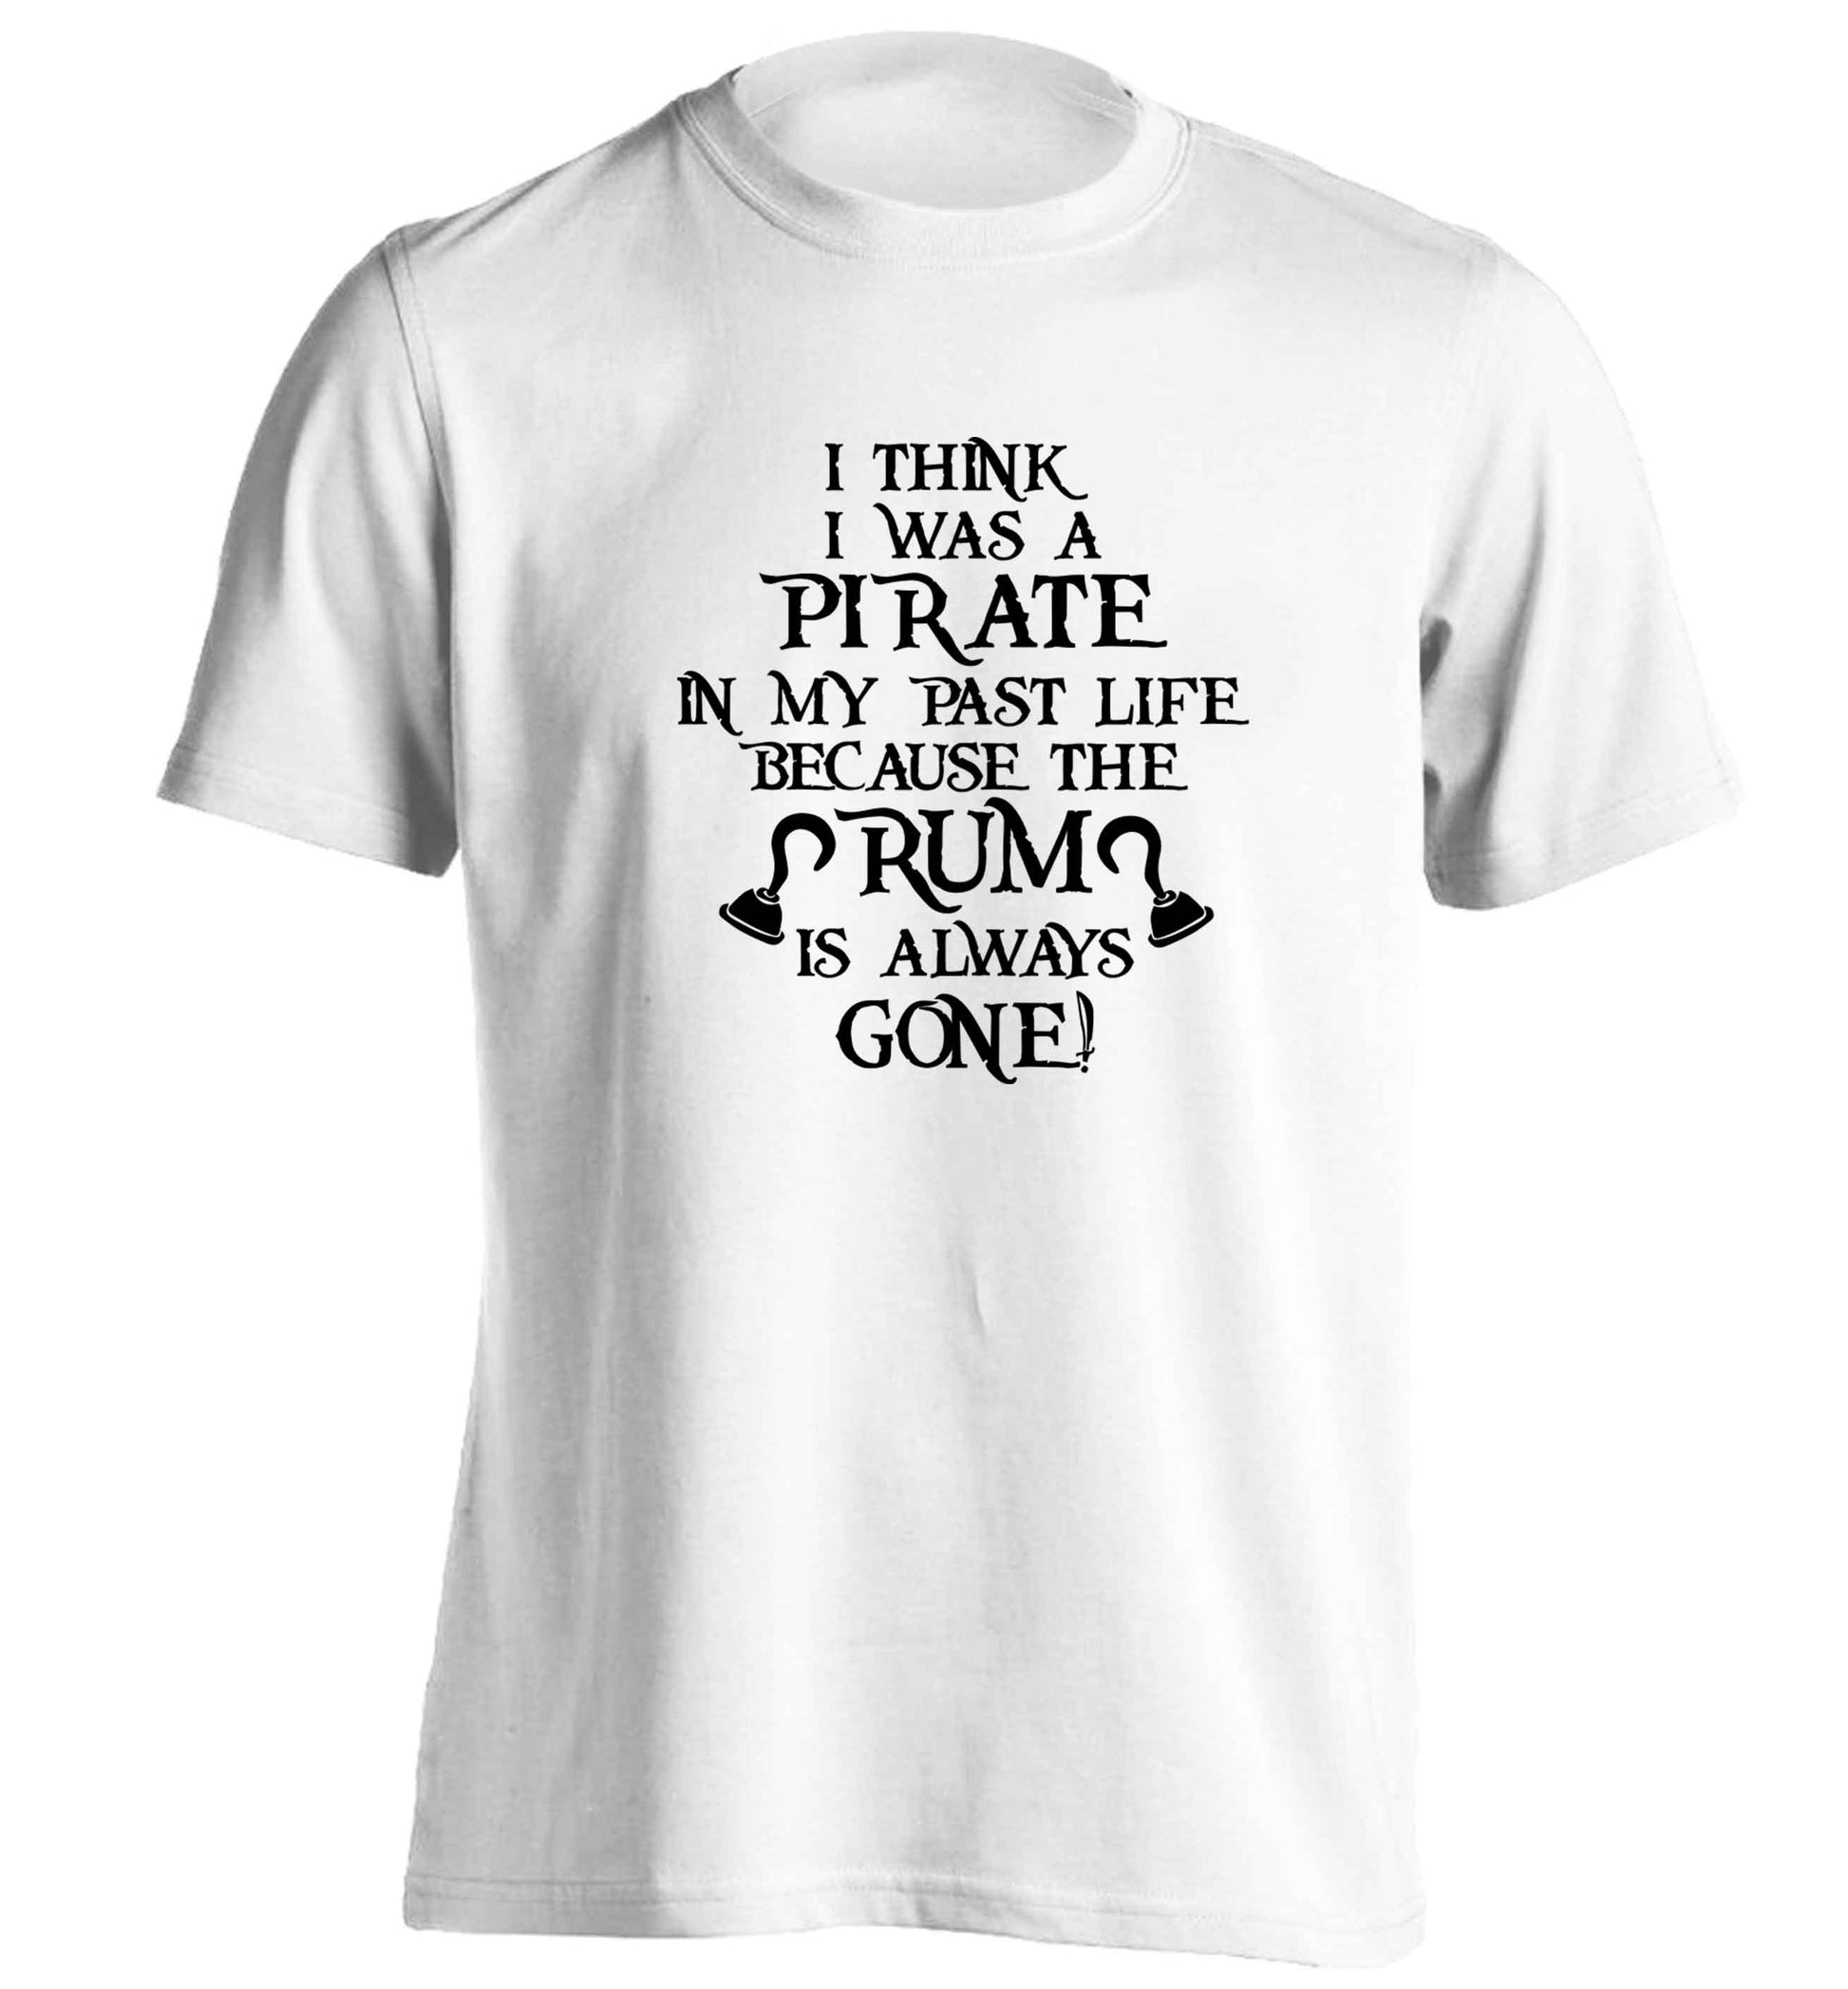 I think I was a pirate in my past life the rum is always gone adults unisex white Tshirt 2XL